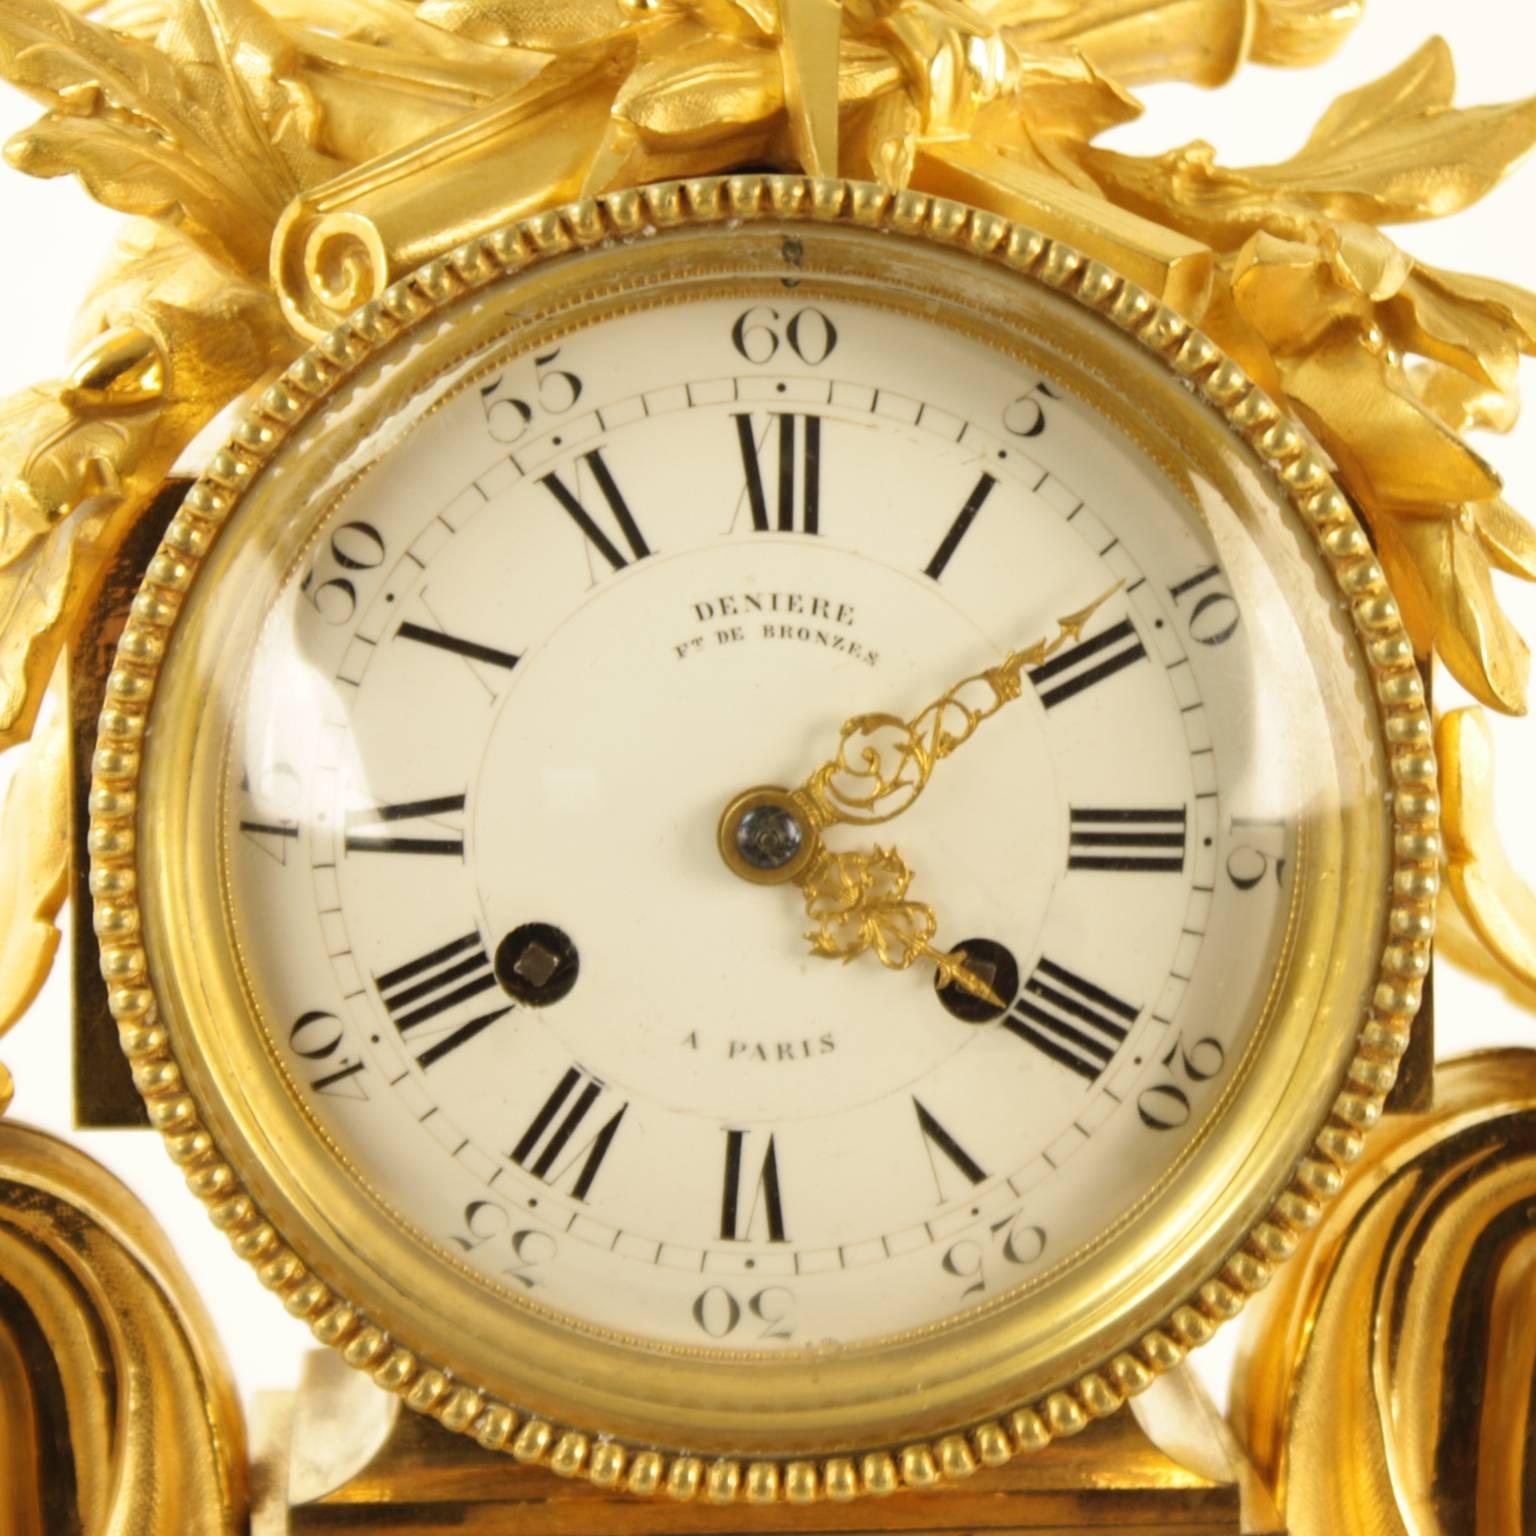 A large and impressive Louis XVI style ormolu mantel clock, the white enamel dial with Roman and Arabic numerals, surmounted by trophies of architecture, literature, music and war, flanked by acanthus leave corbels scrolling out as the dominant